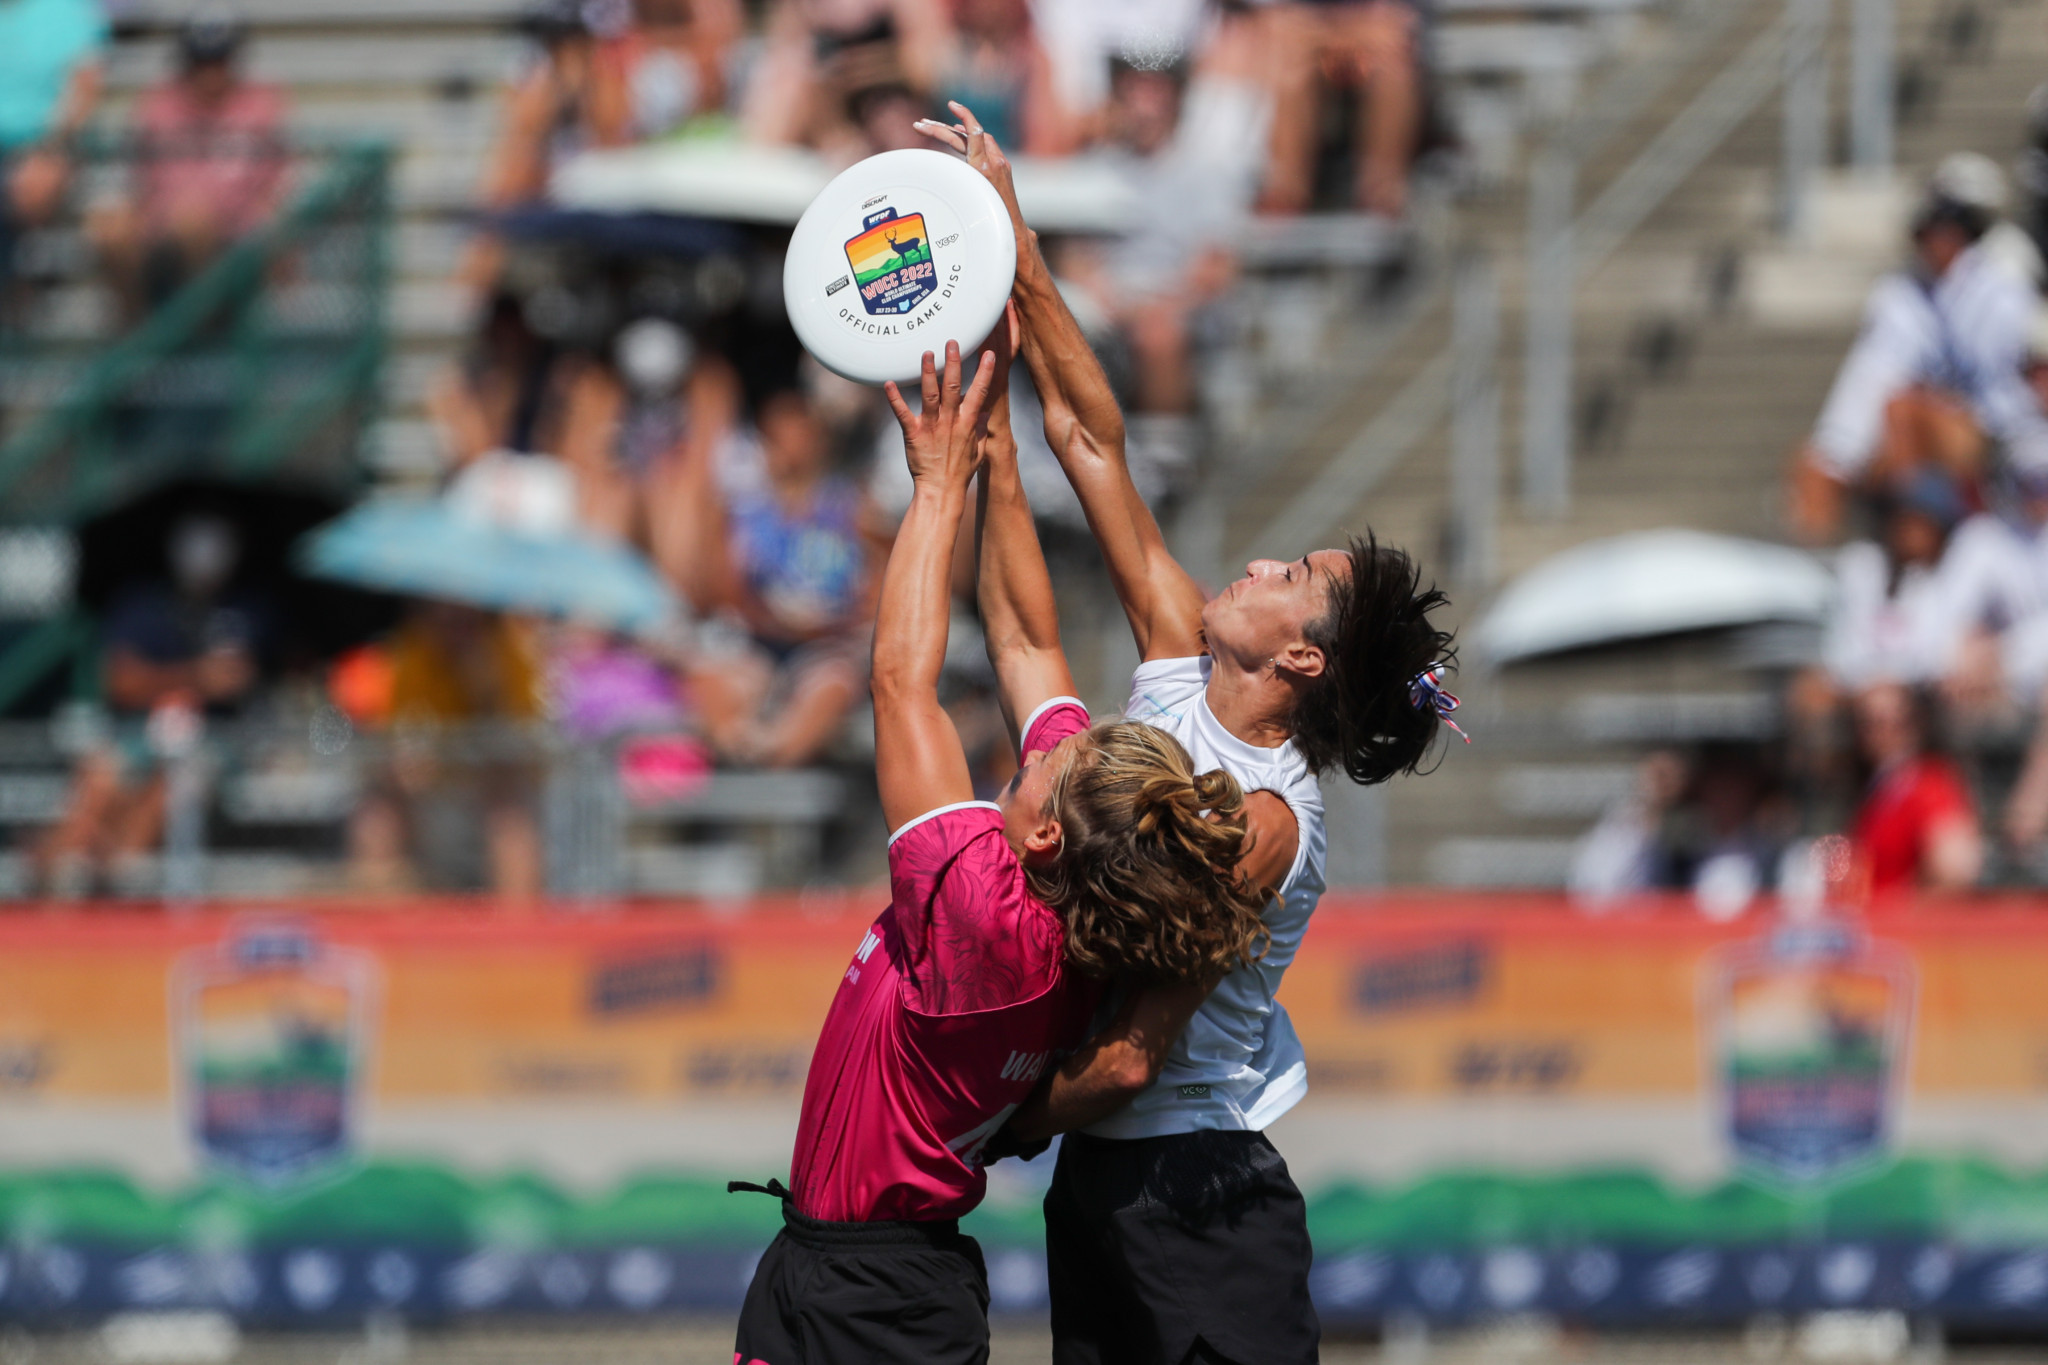 Revolution and Fury competed in a tense contest at the Atrium Stadium in Ohio ©Paul Rutherford for UltiPhotos 